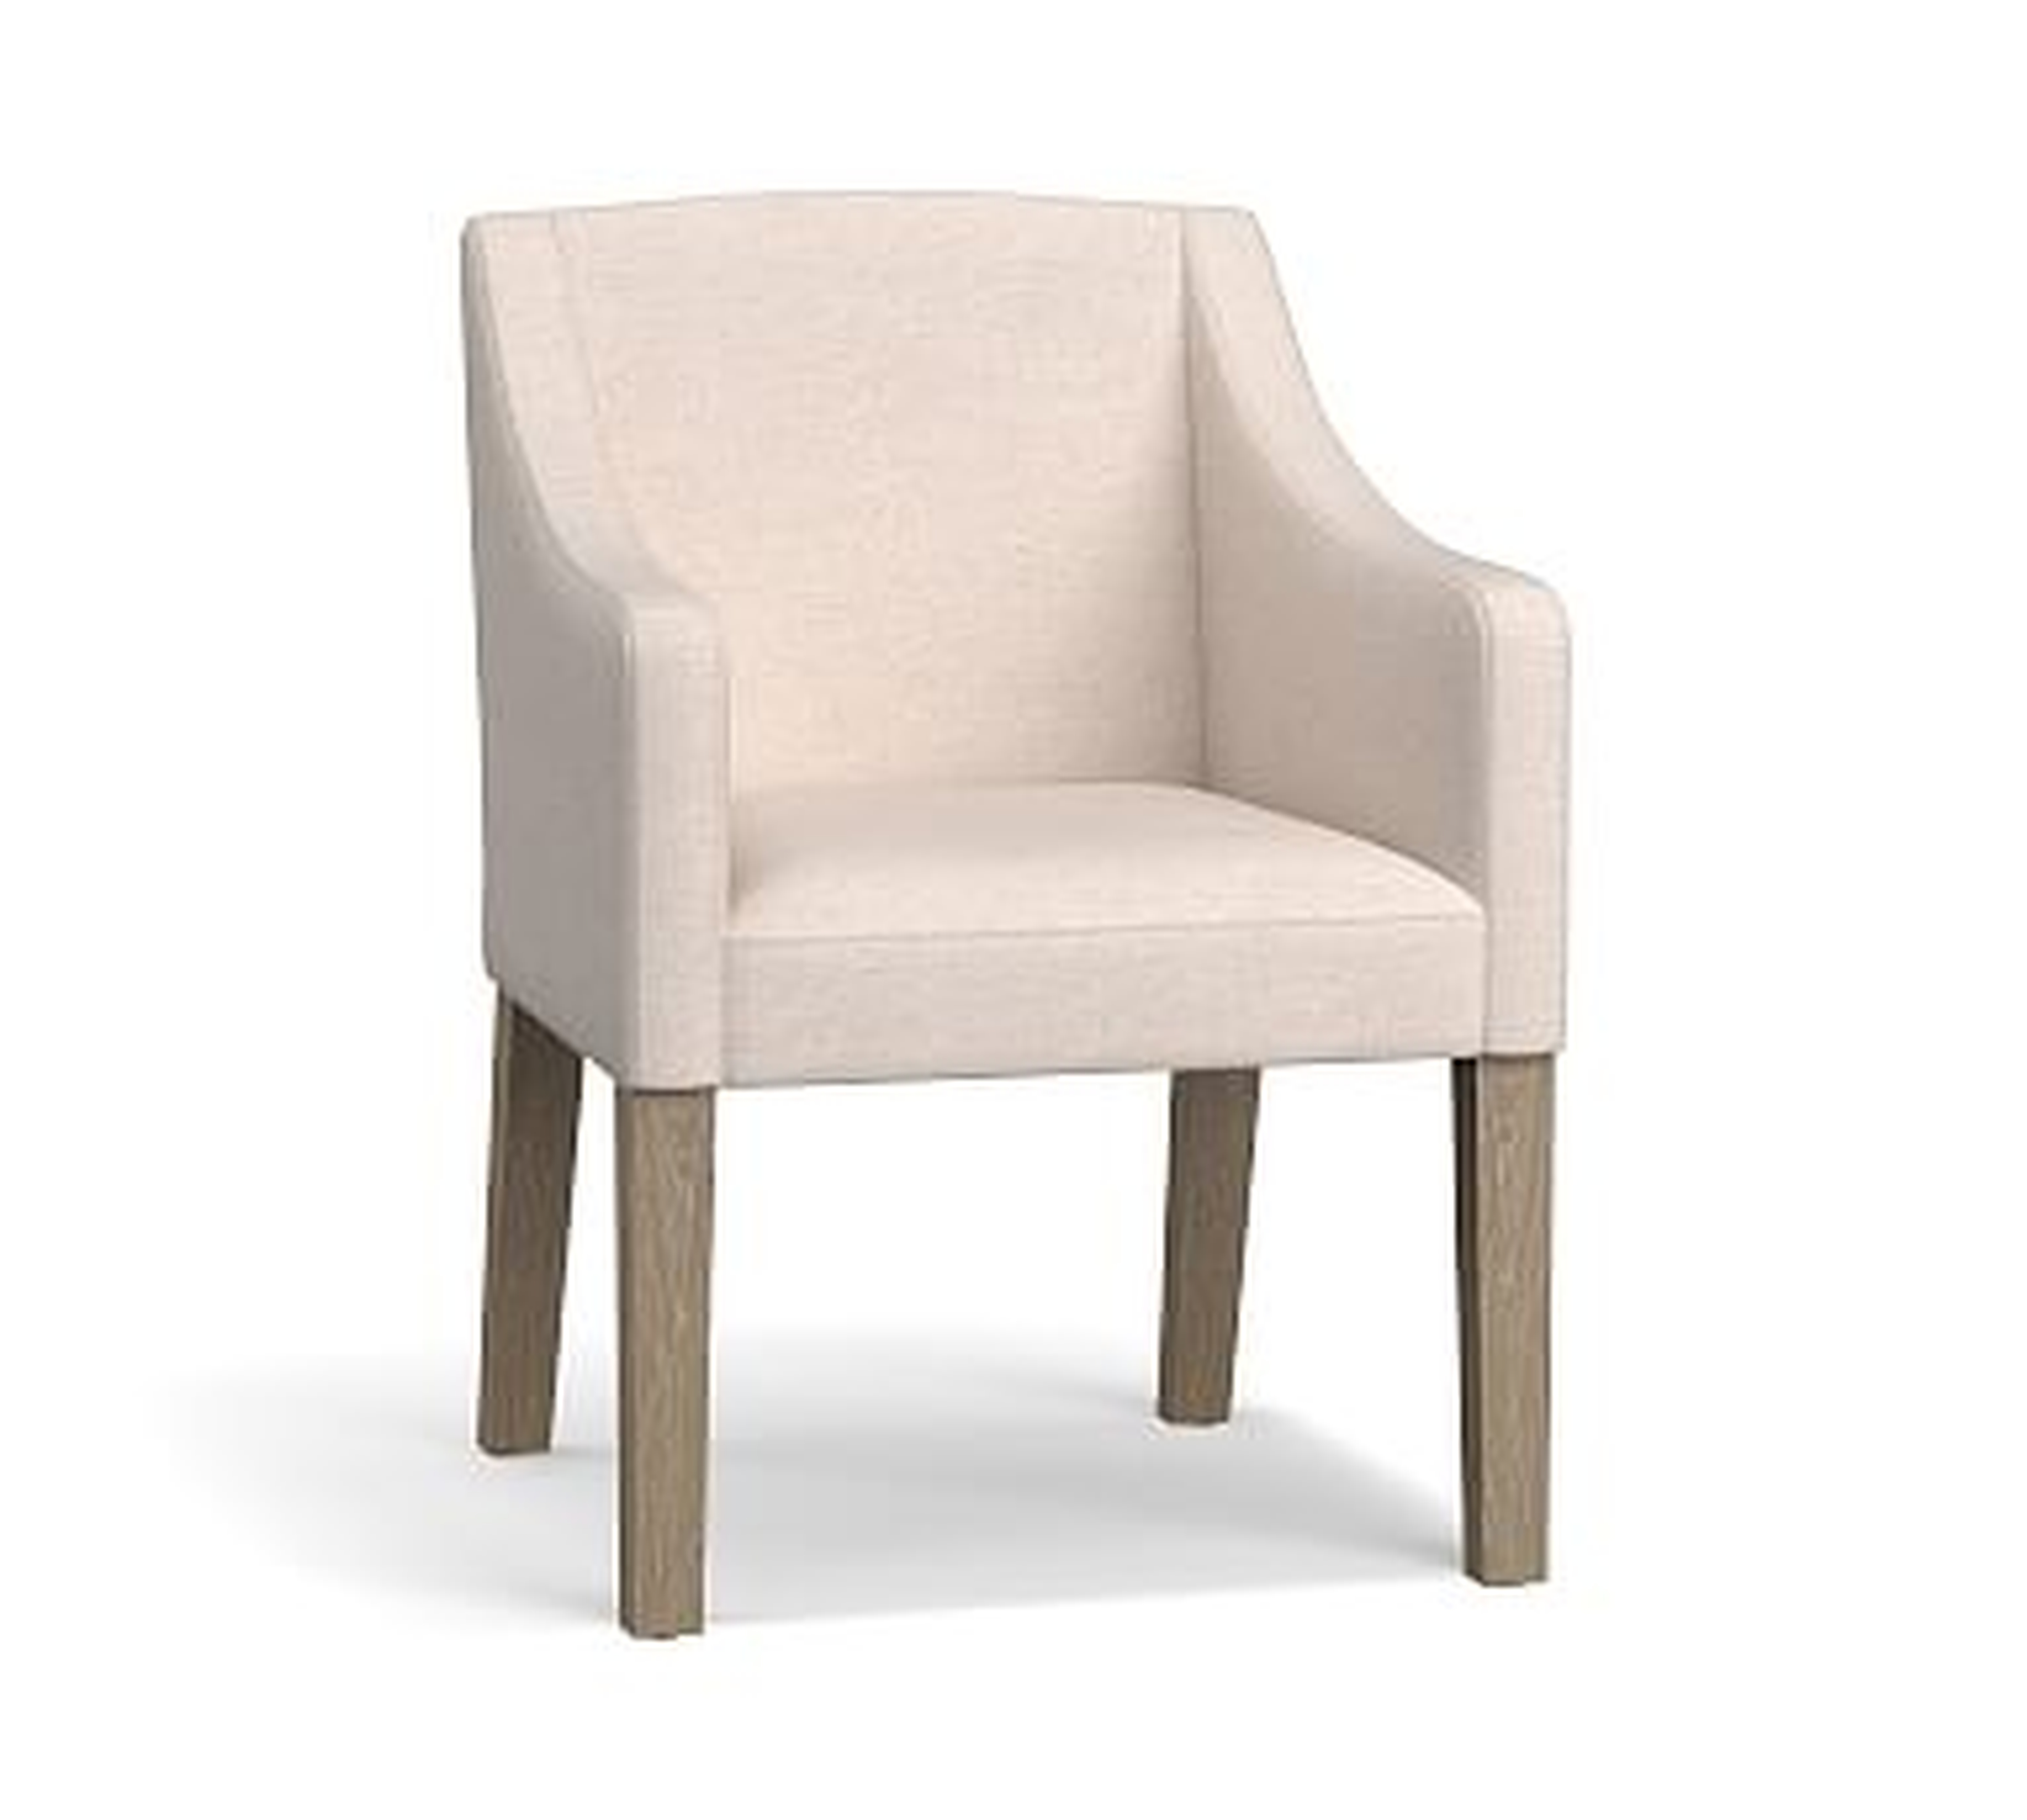 Classic Upholstered Slope Armchair with Seadrift Legs, Performance Brushed Basketweave Oatmeal - Pottery Barn